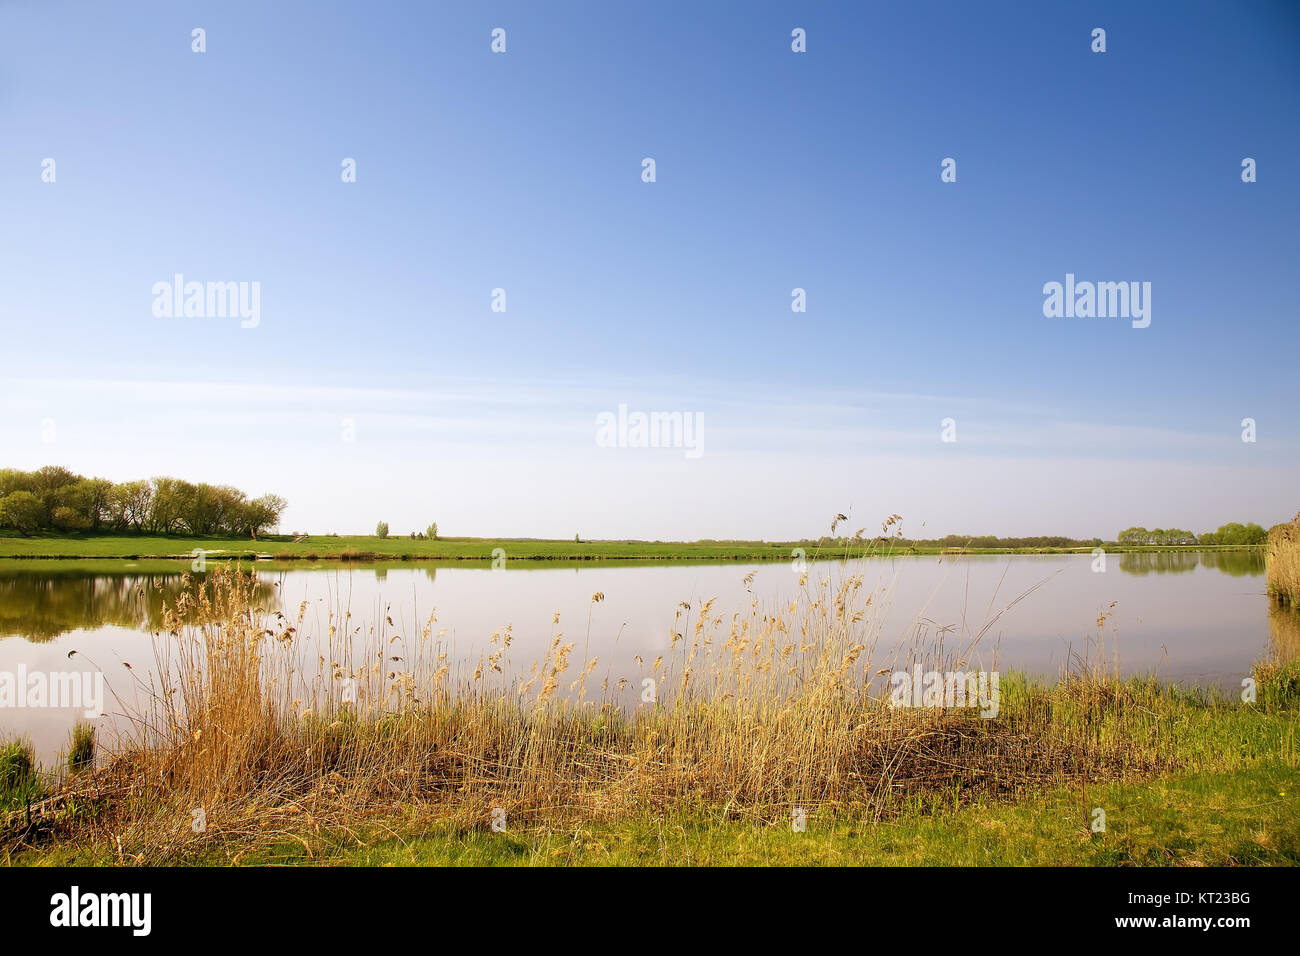 A large beautiful lake, with banks overgrown with reeds. Stock Photo